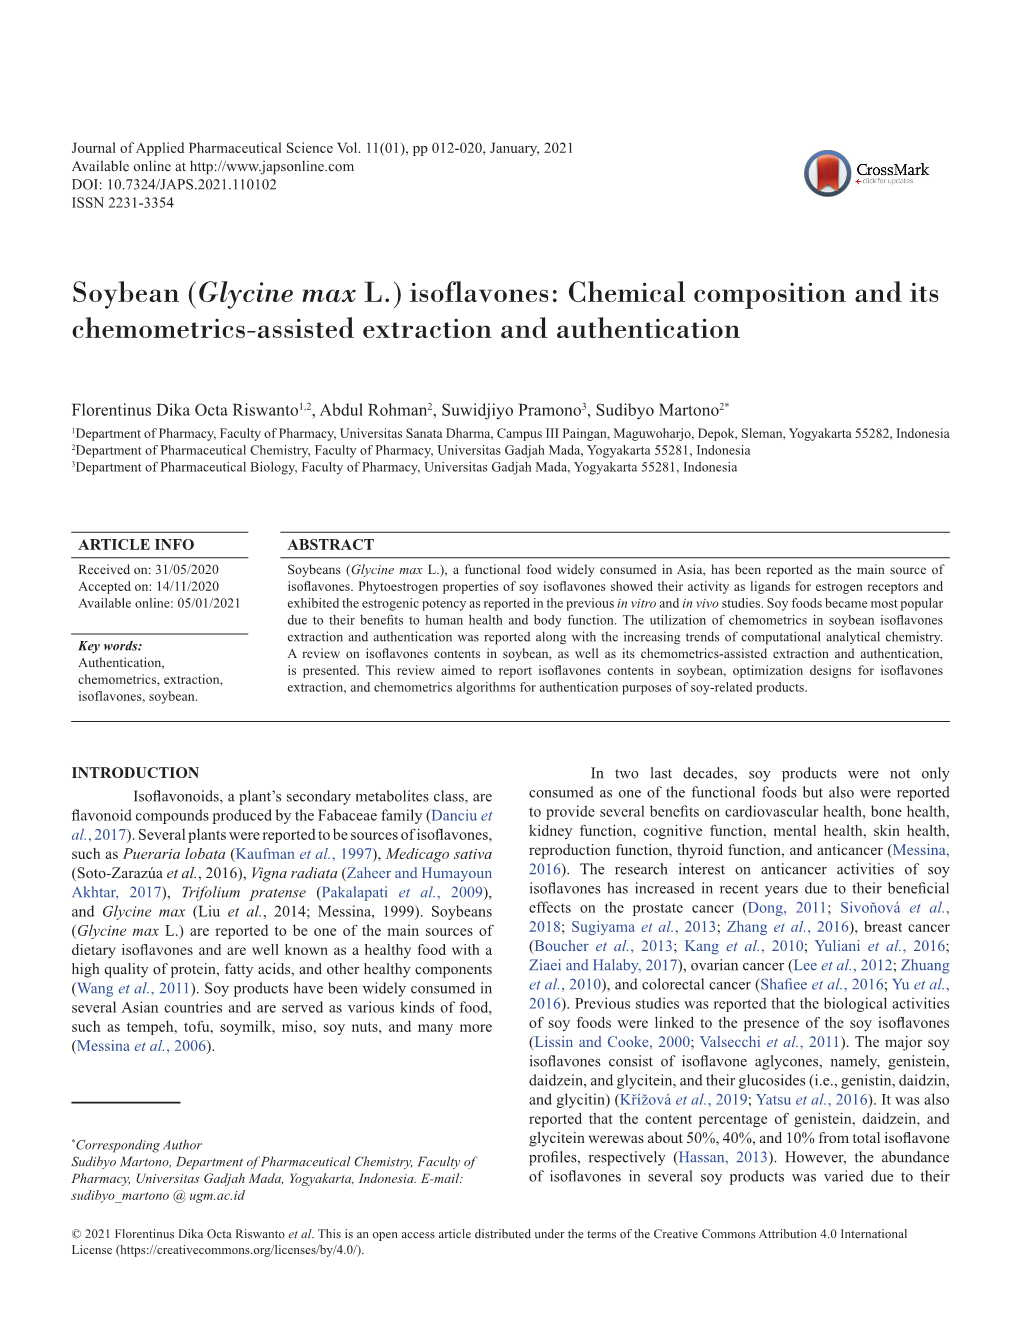 Soybean (Glycine Max L.) Isoflavones: Chemical Composition and Its Chemometrics-Assisted Extraction and Authentication